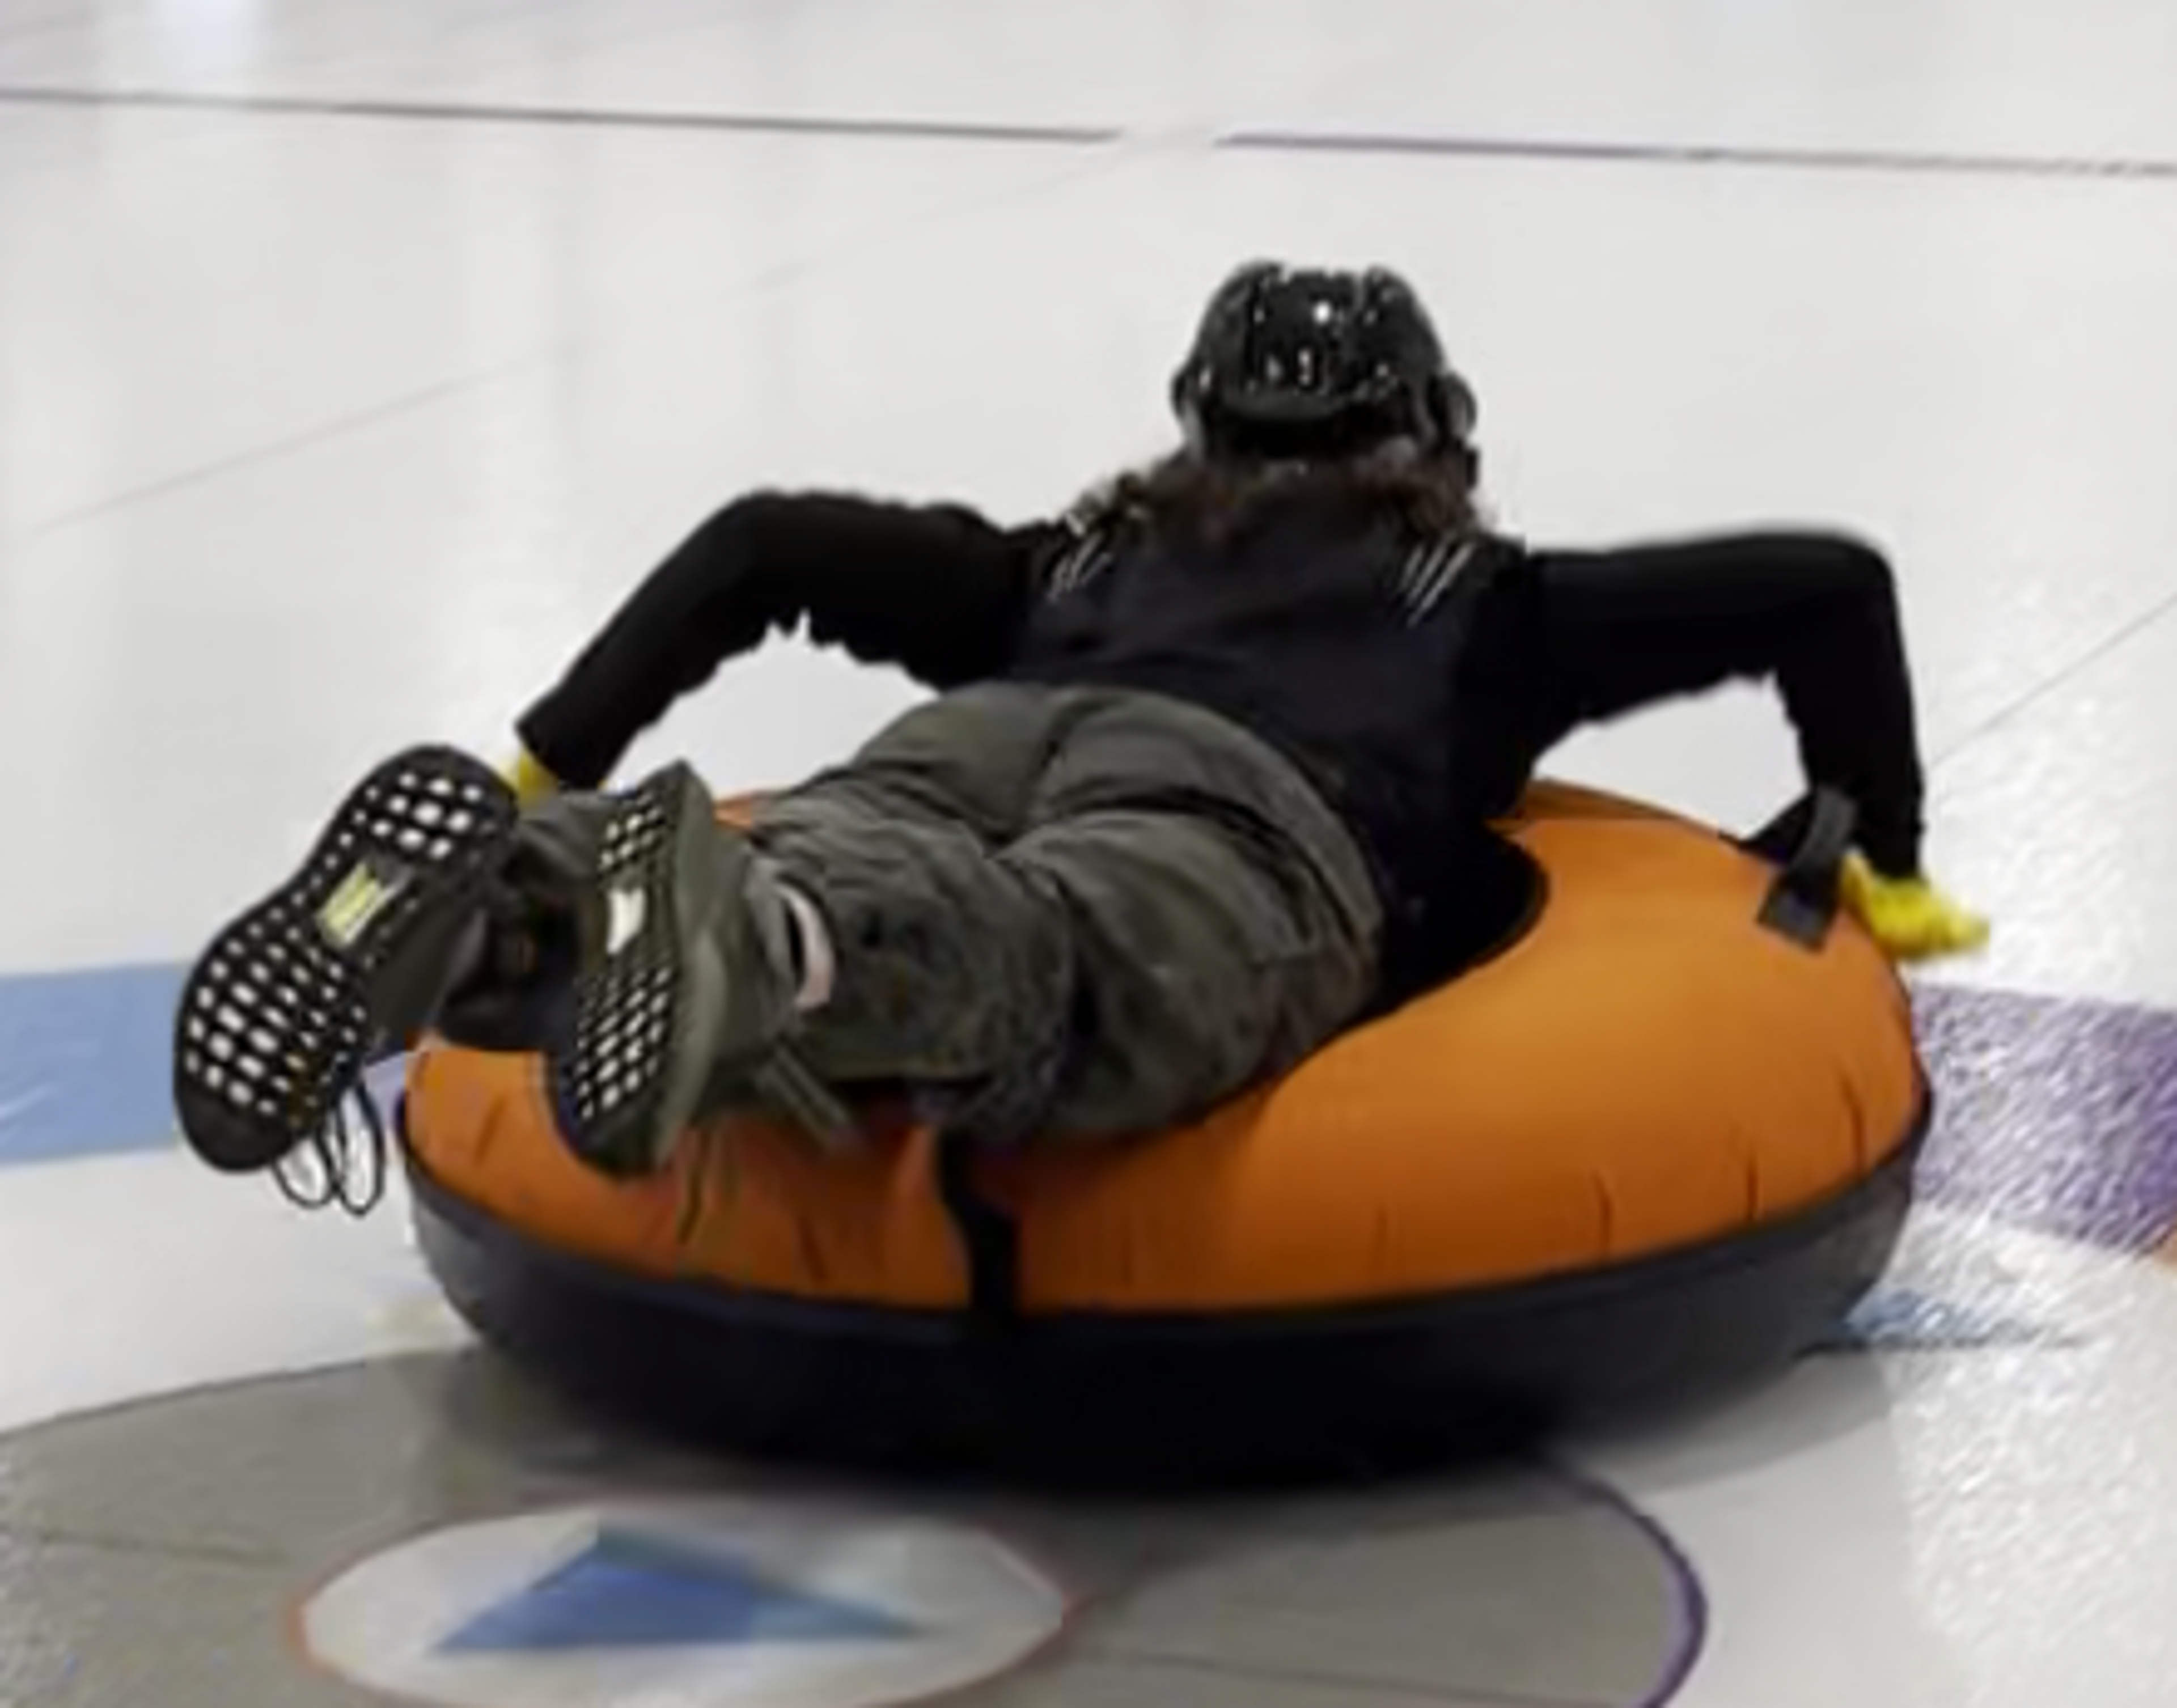 A grown person lying on a round tube sliding the curling ice.